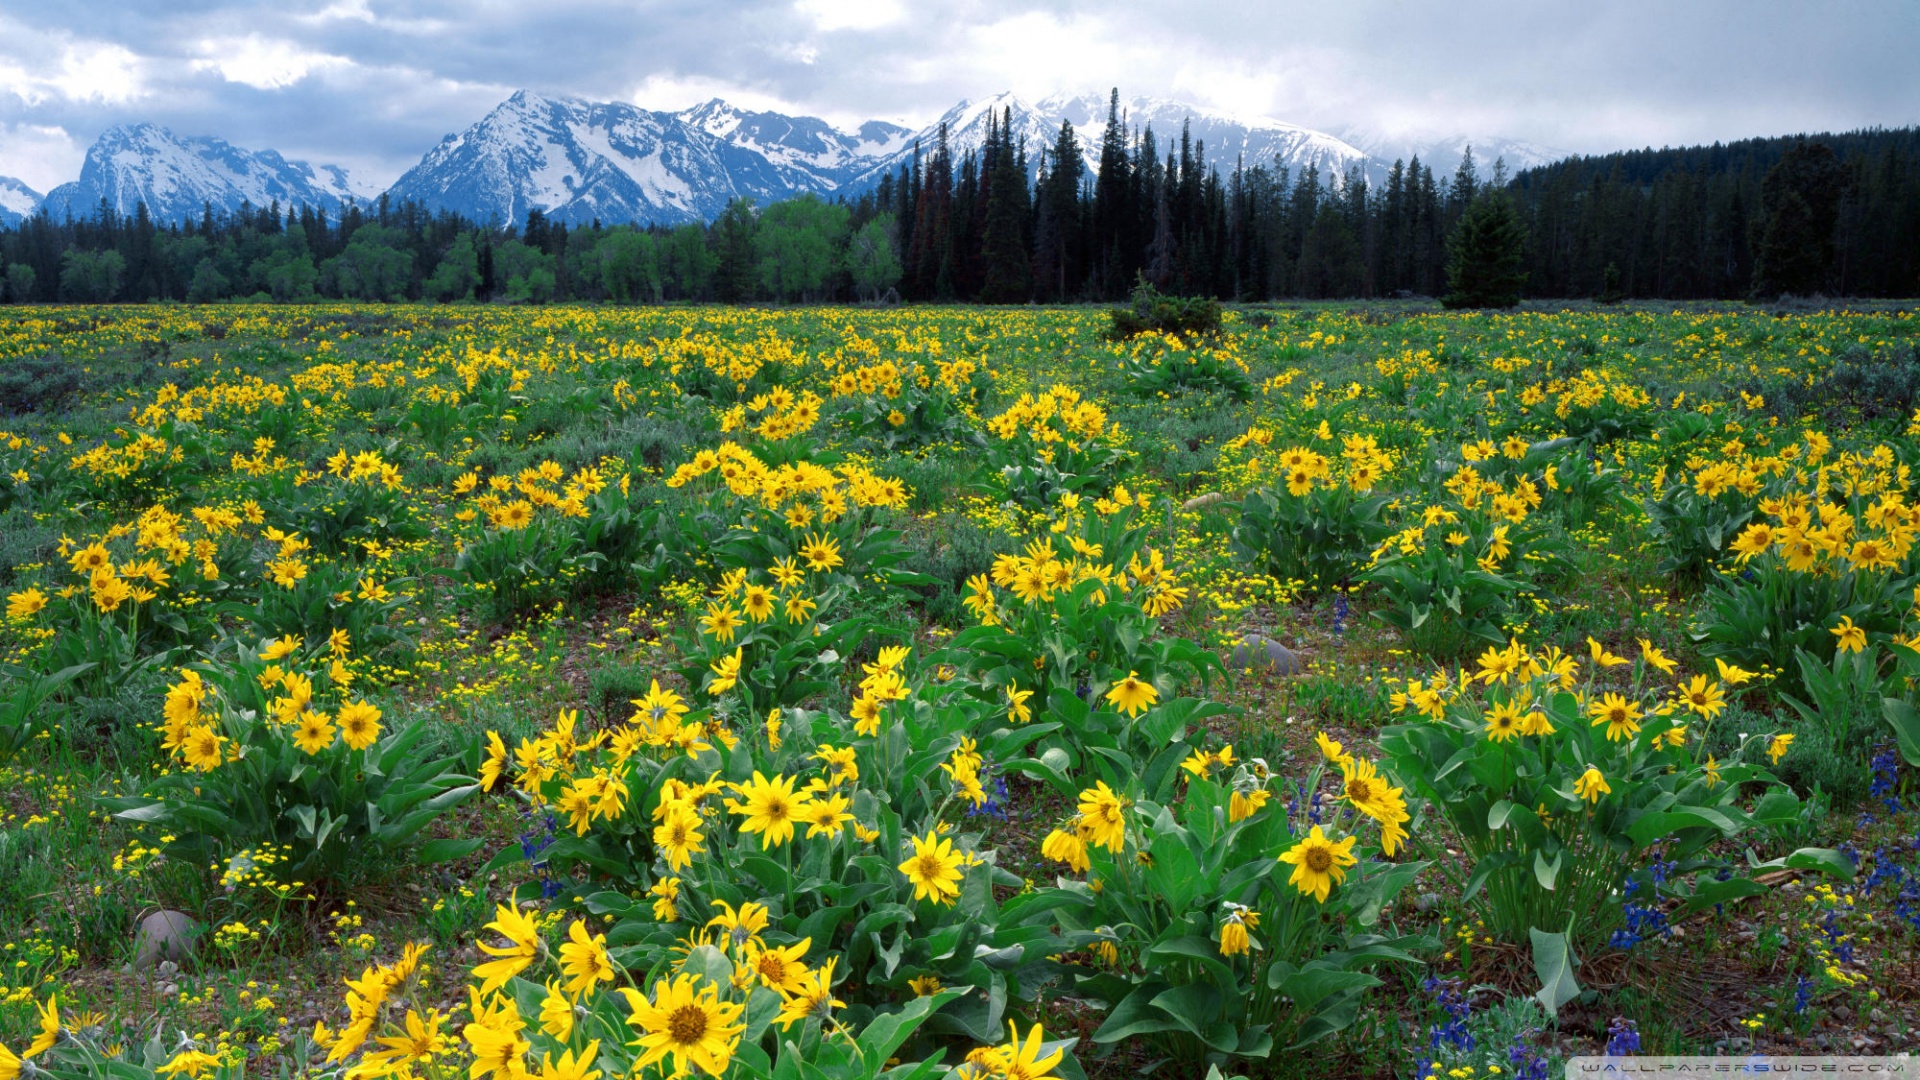 Field Of Arrowleaf Balsamroot And The Teton Range Wyoming - Mountains And Yellow Flowers Hd Background Iphone - HD Wallpaper 